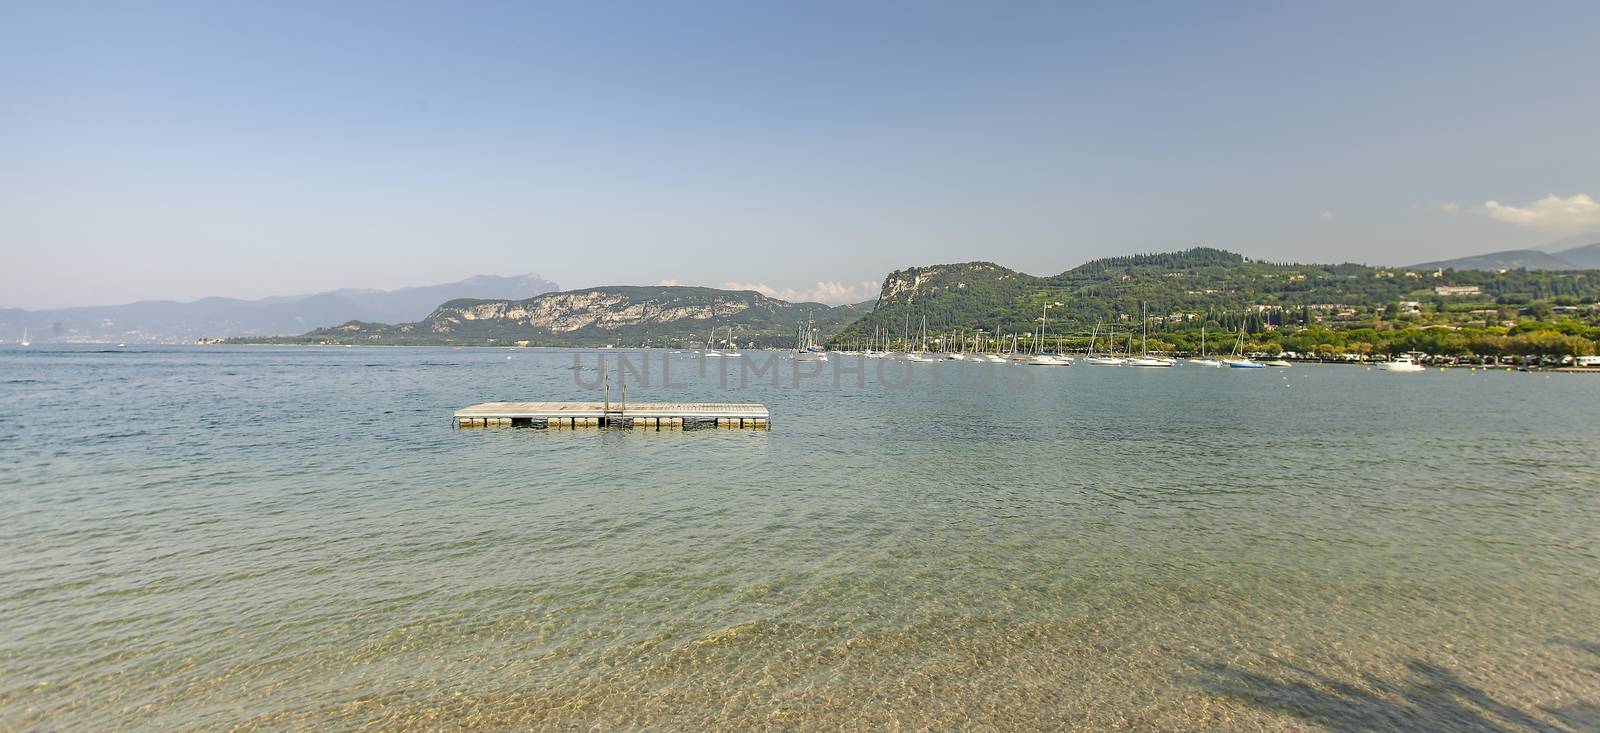 View of the Grada Lake from Bardolino, a famous place in Italy